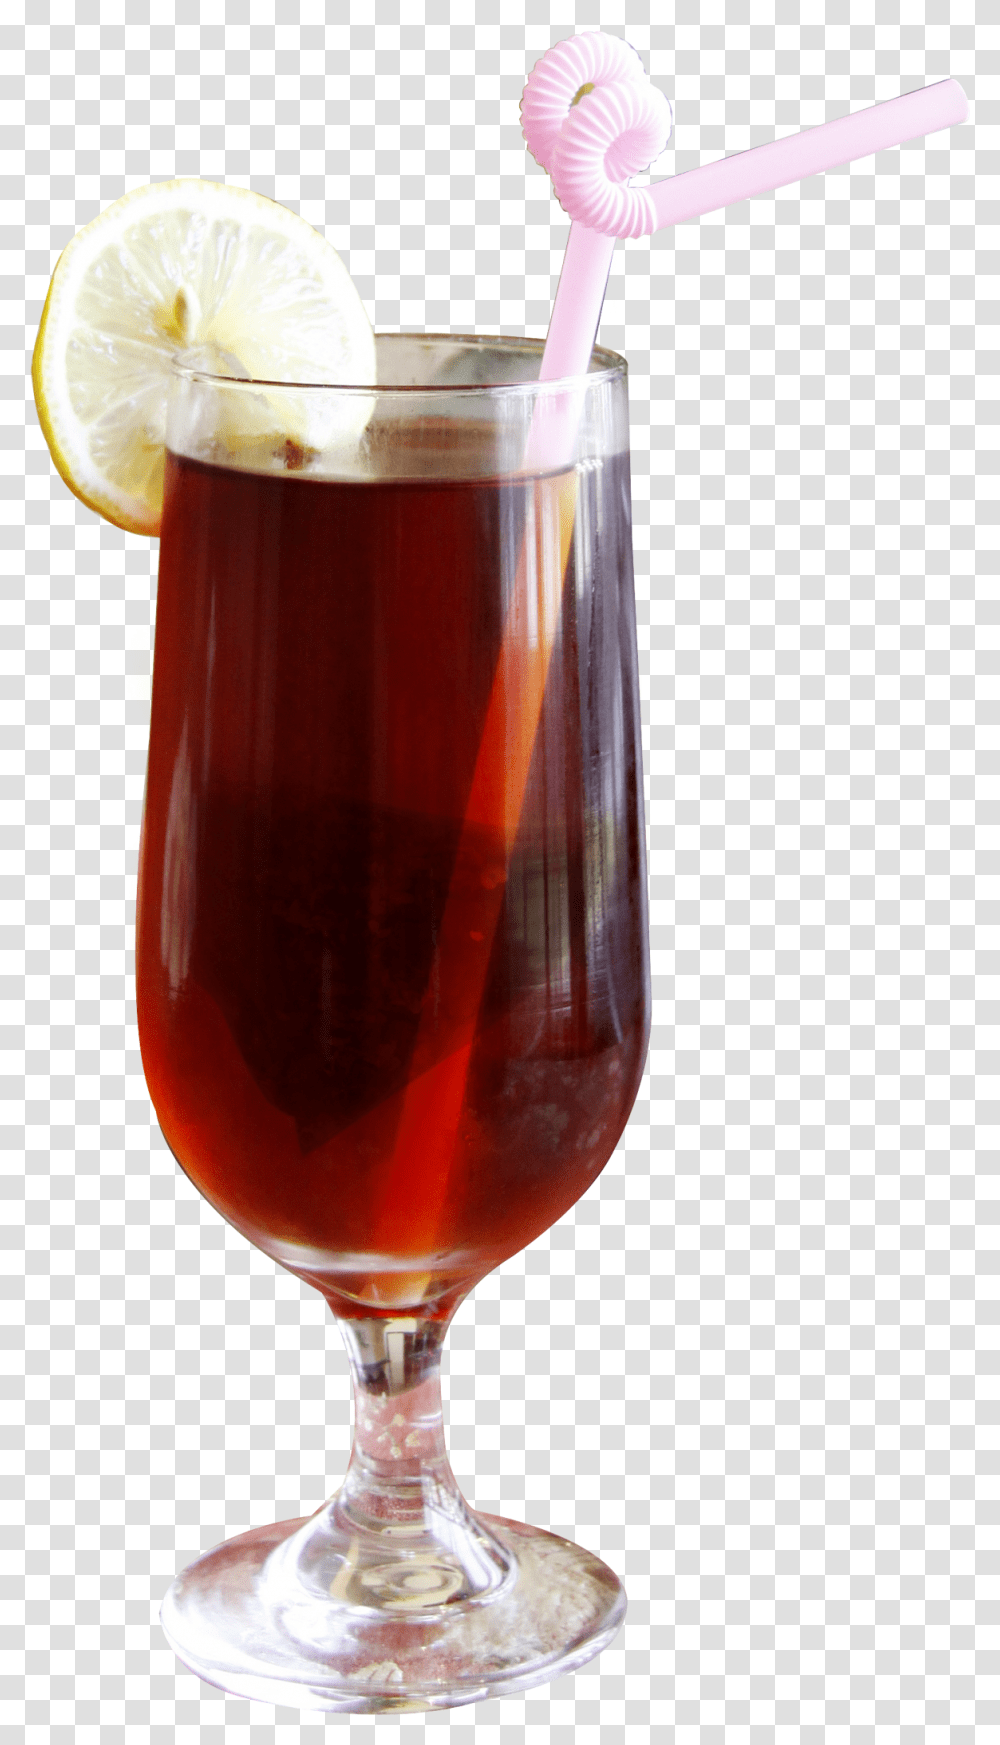 Clip Art Drinking Beer With A Straw, Beverage, Cocktail, Alcohol, Glass Transparent Png